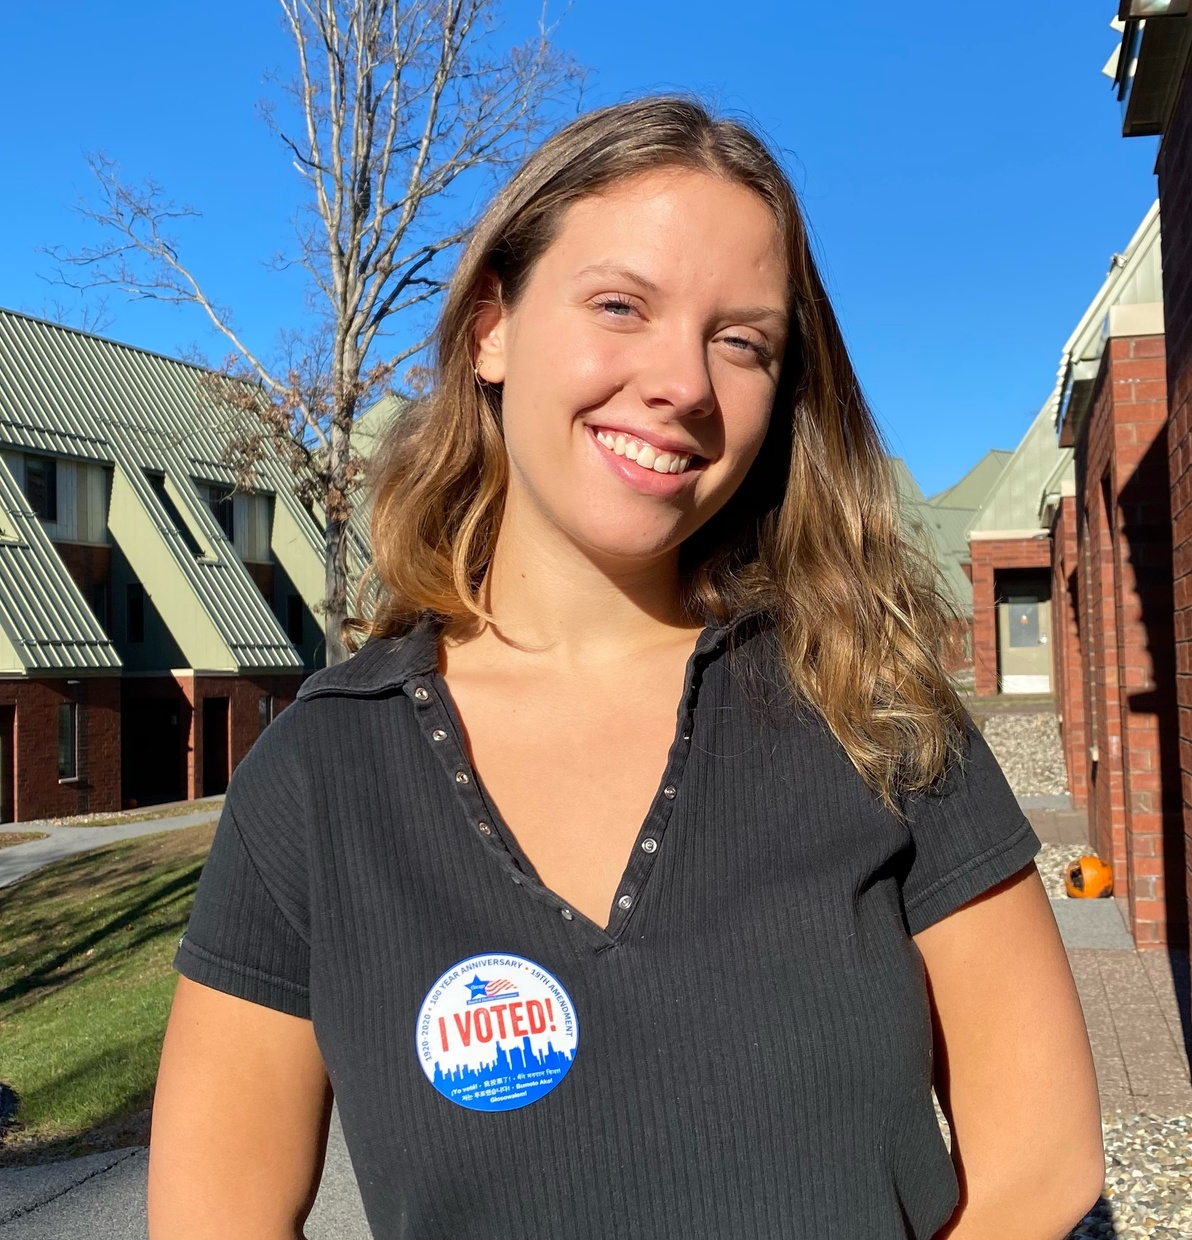 A young woman wearing a black shirt with a sticker on her chest that says, “I VOTED!” in bold red font smiles at the camera while standing outside in front of the Skidmore apartments.